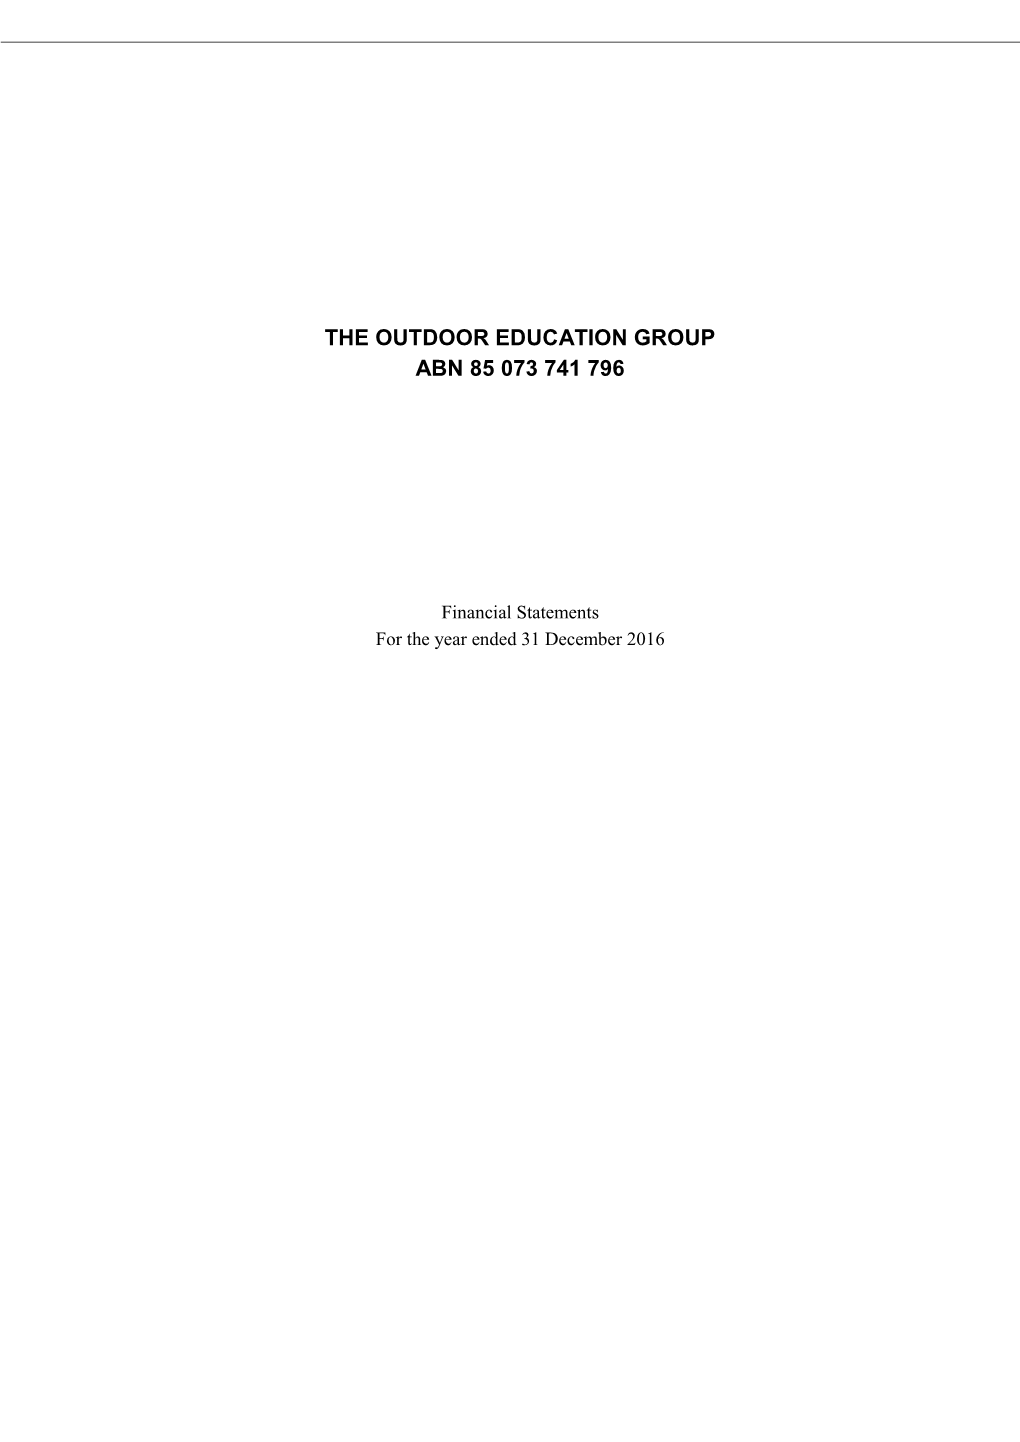 THE OUTDOOR EDUCATION GROUP LIMITED Balance Sheet As at 31 December 2016